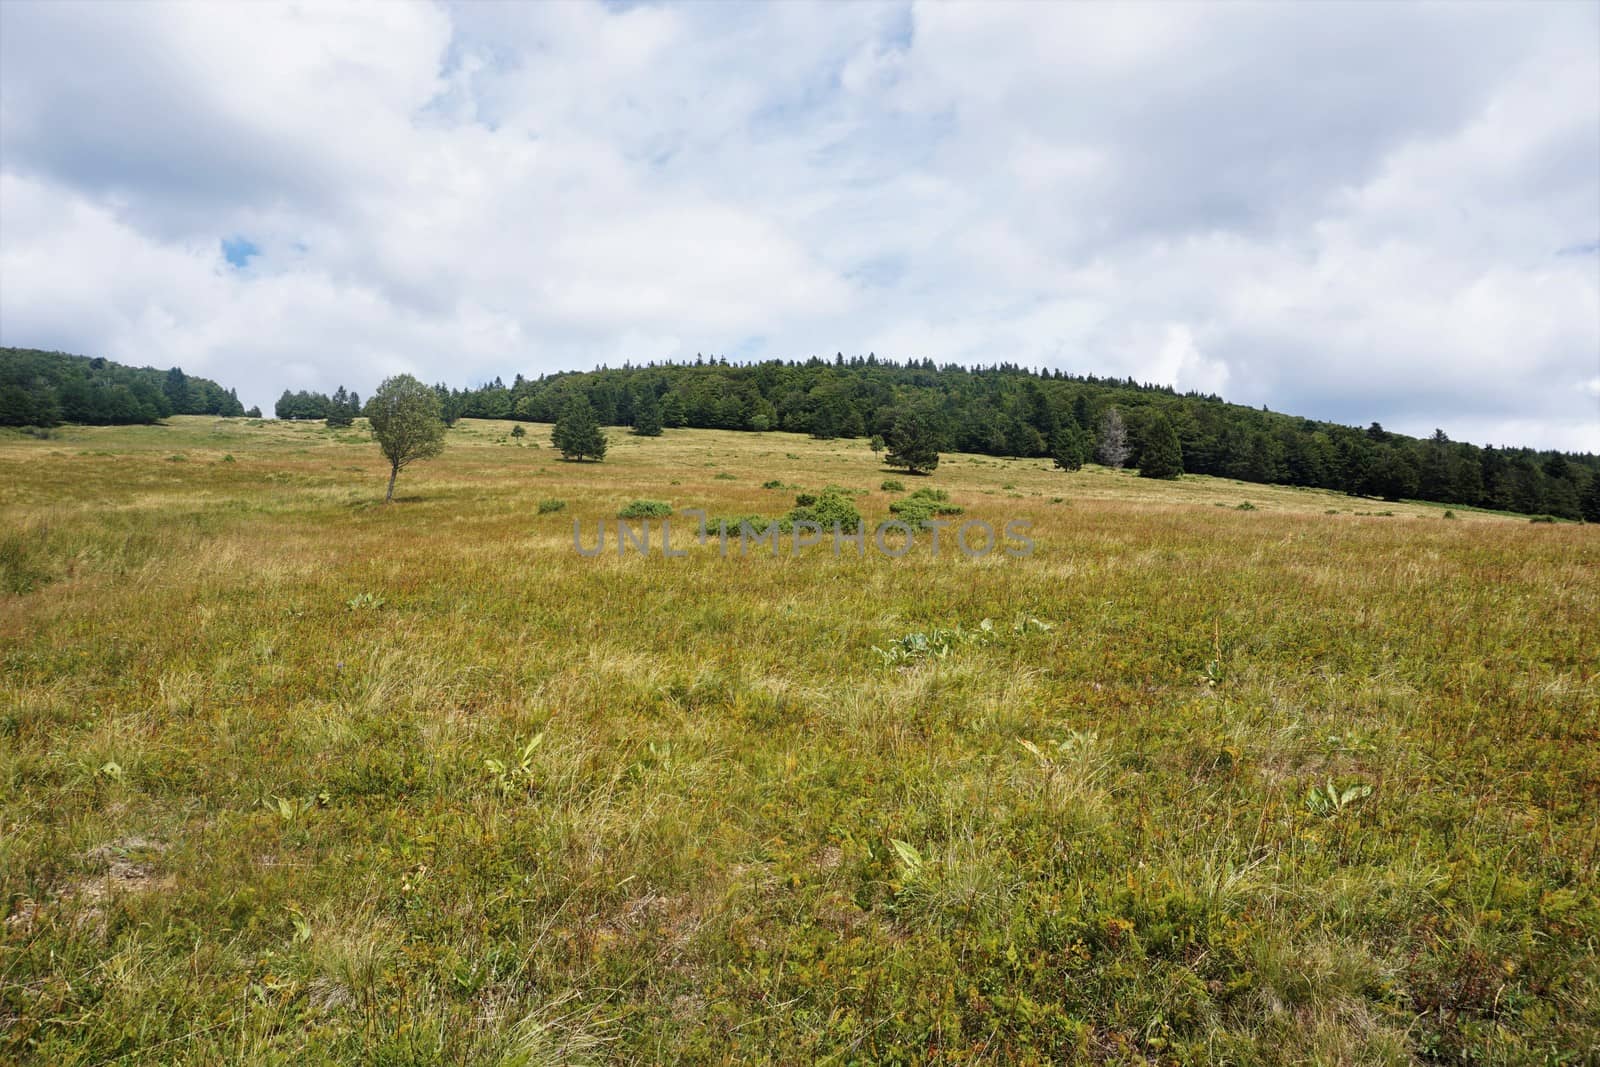 The alpine meadows in the Vosges, France are a paradise for insects